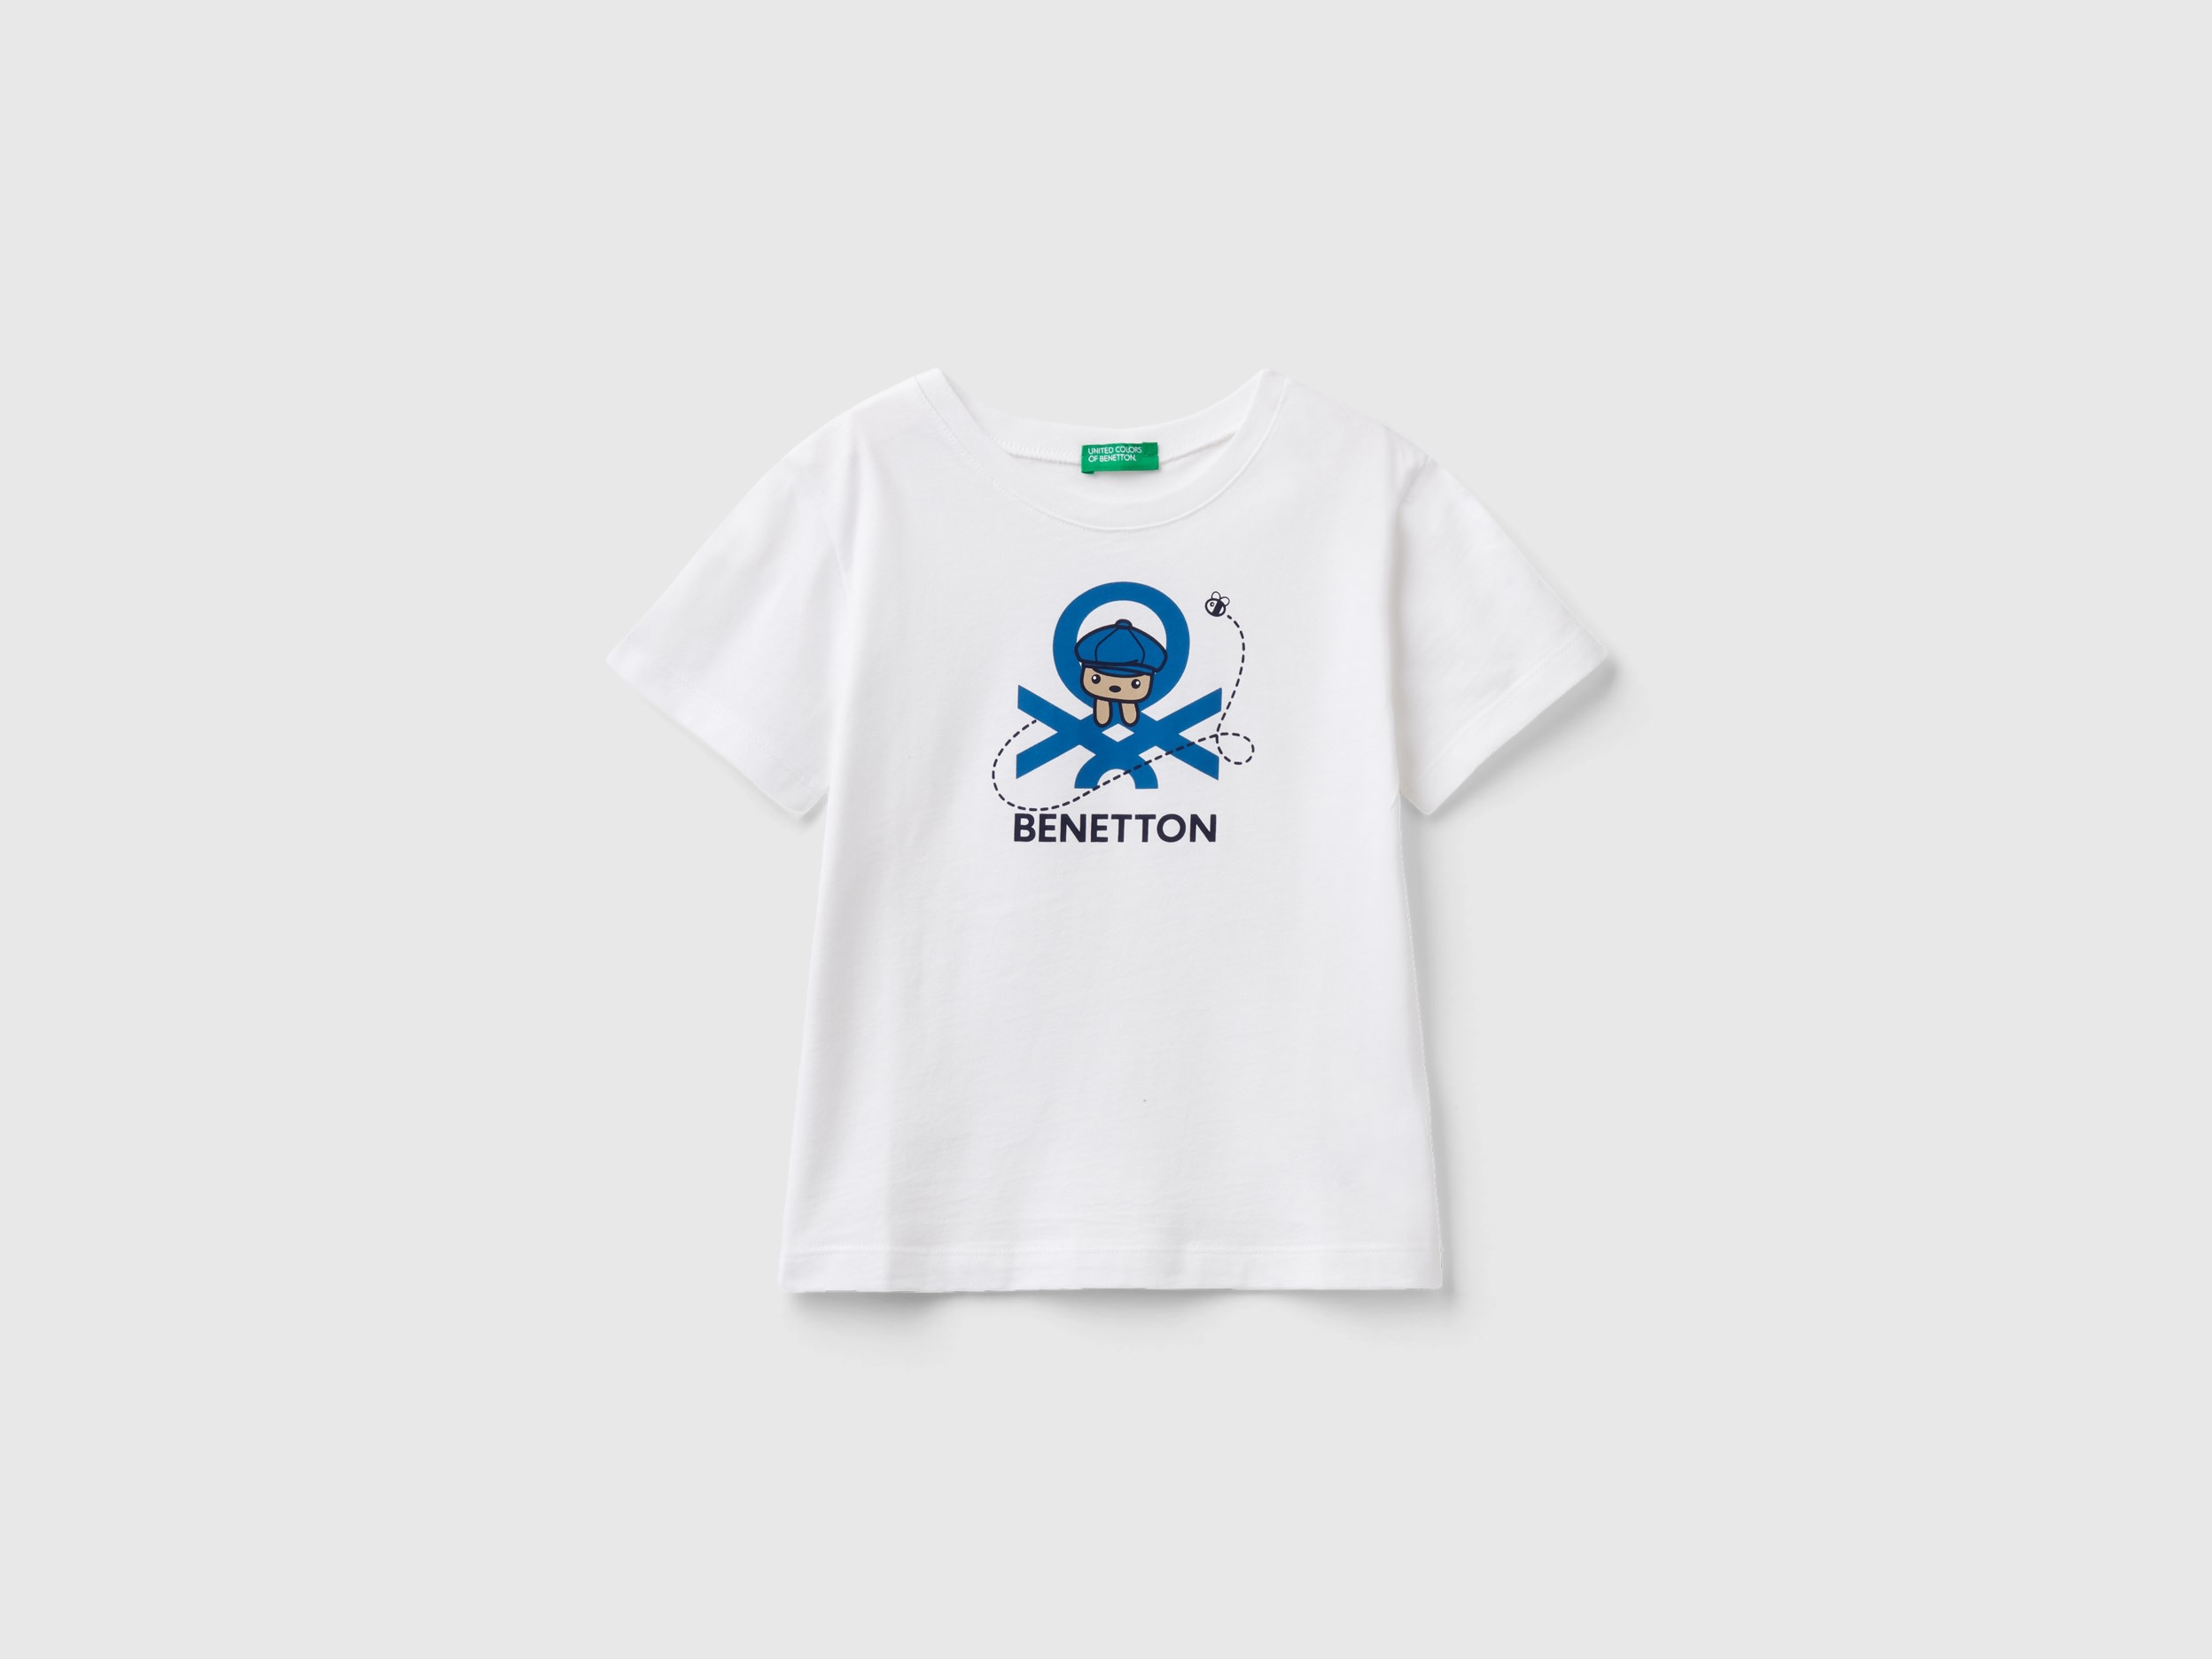 Benetton, T-shirt With Print In 100% Organic Cotton, size 5-6, White, Kids